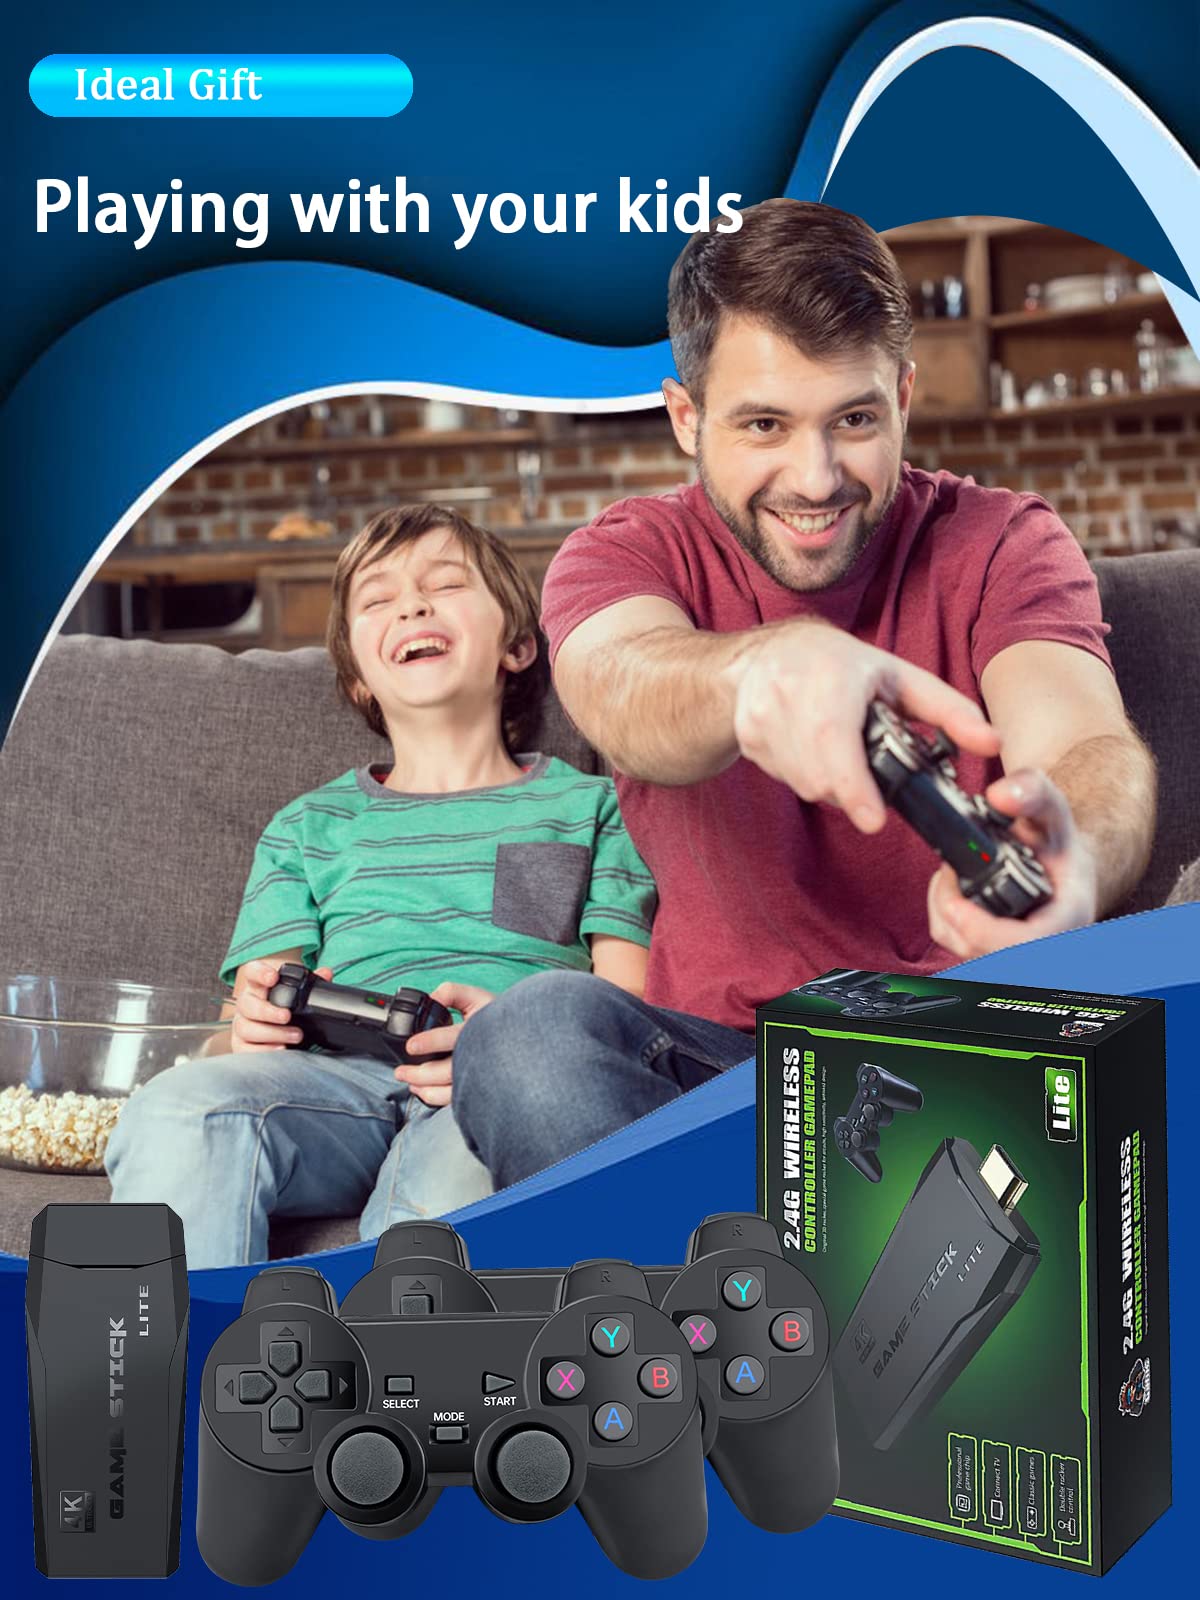 Fadist Retro Game Console, 4K HDMI HD Output Video Game Player, Built in 10000+ Classic Games, with 2 Ergonomics Controllers, Plug and Play Mini Game Box, Ideal Gift for Kids, Adult, Friend, Lover